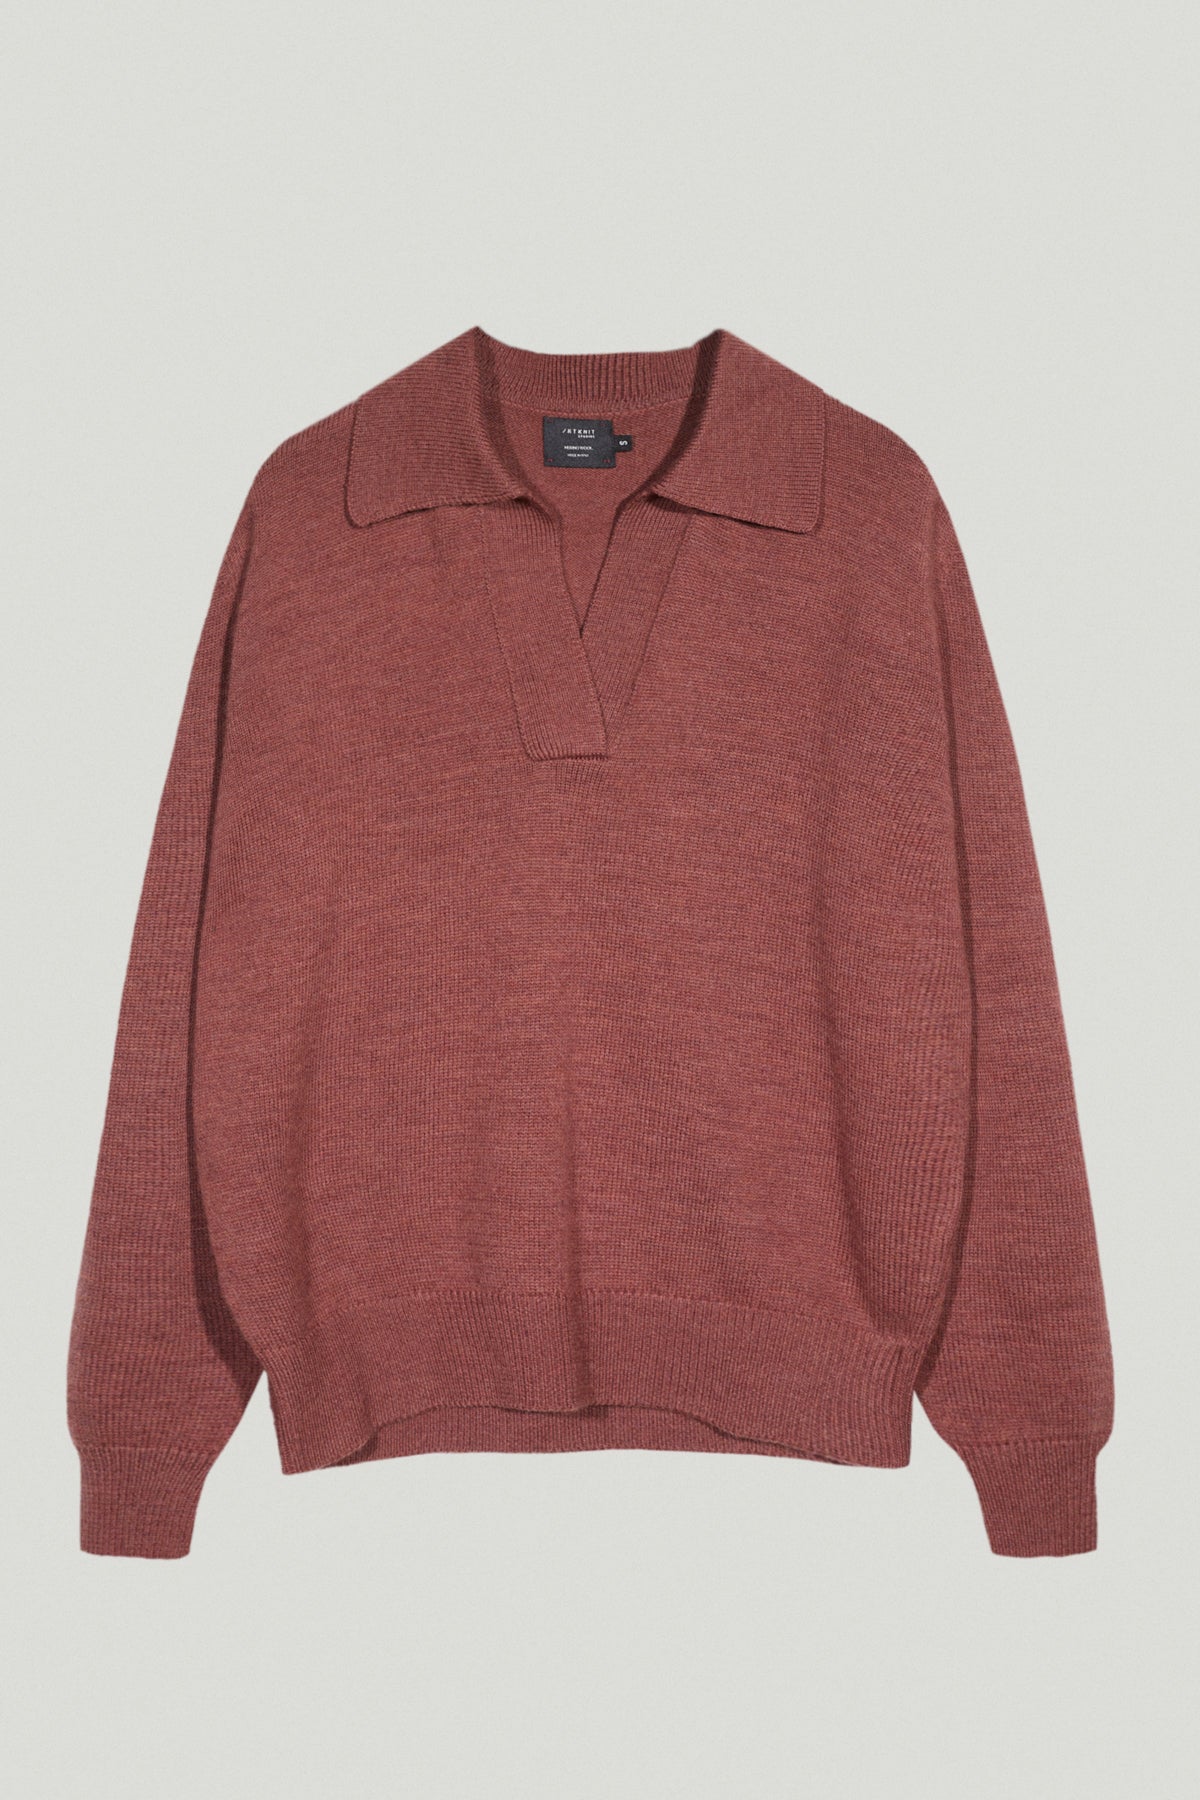 Madder Red | The Natural Dye Polo